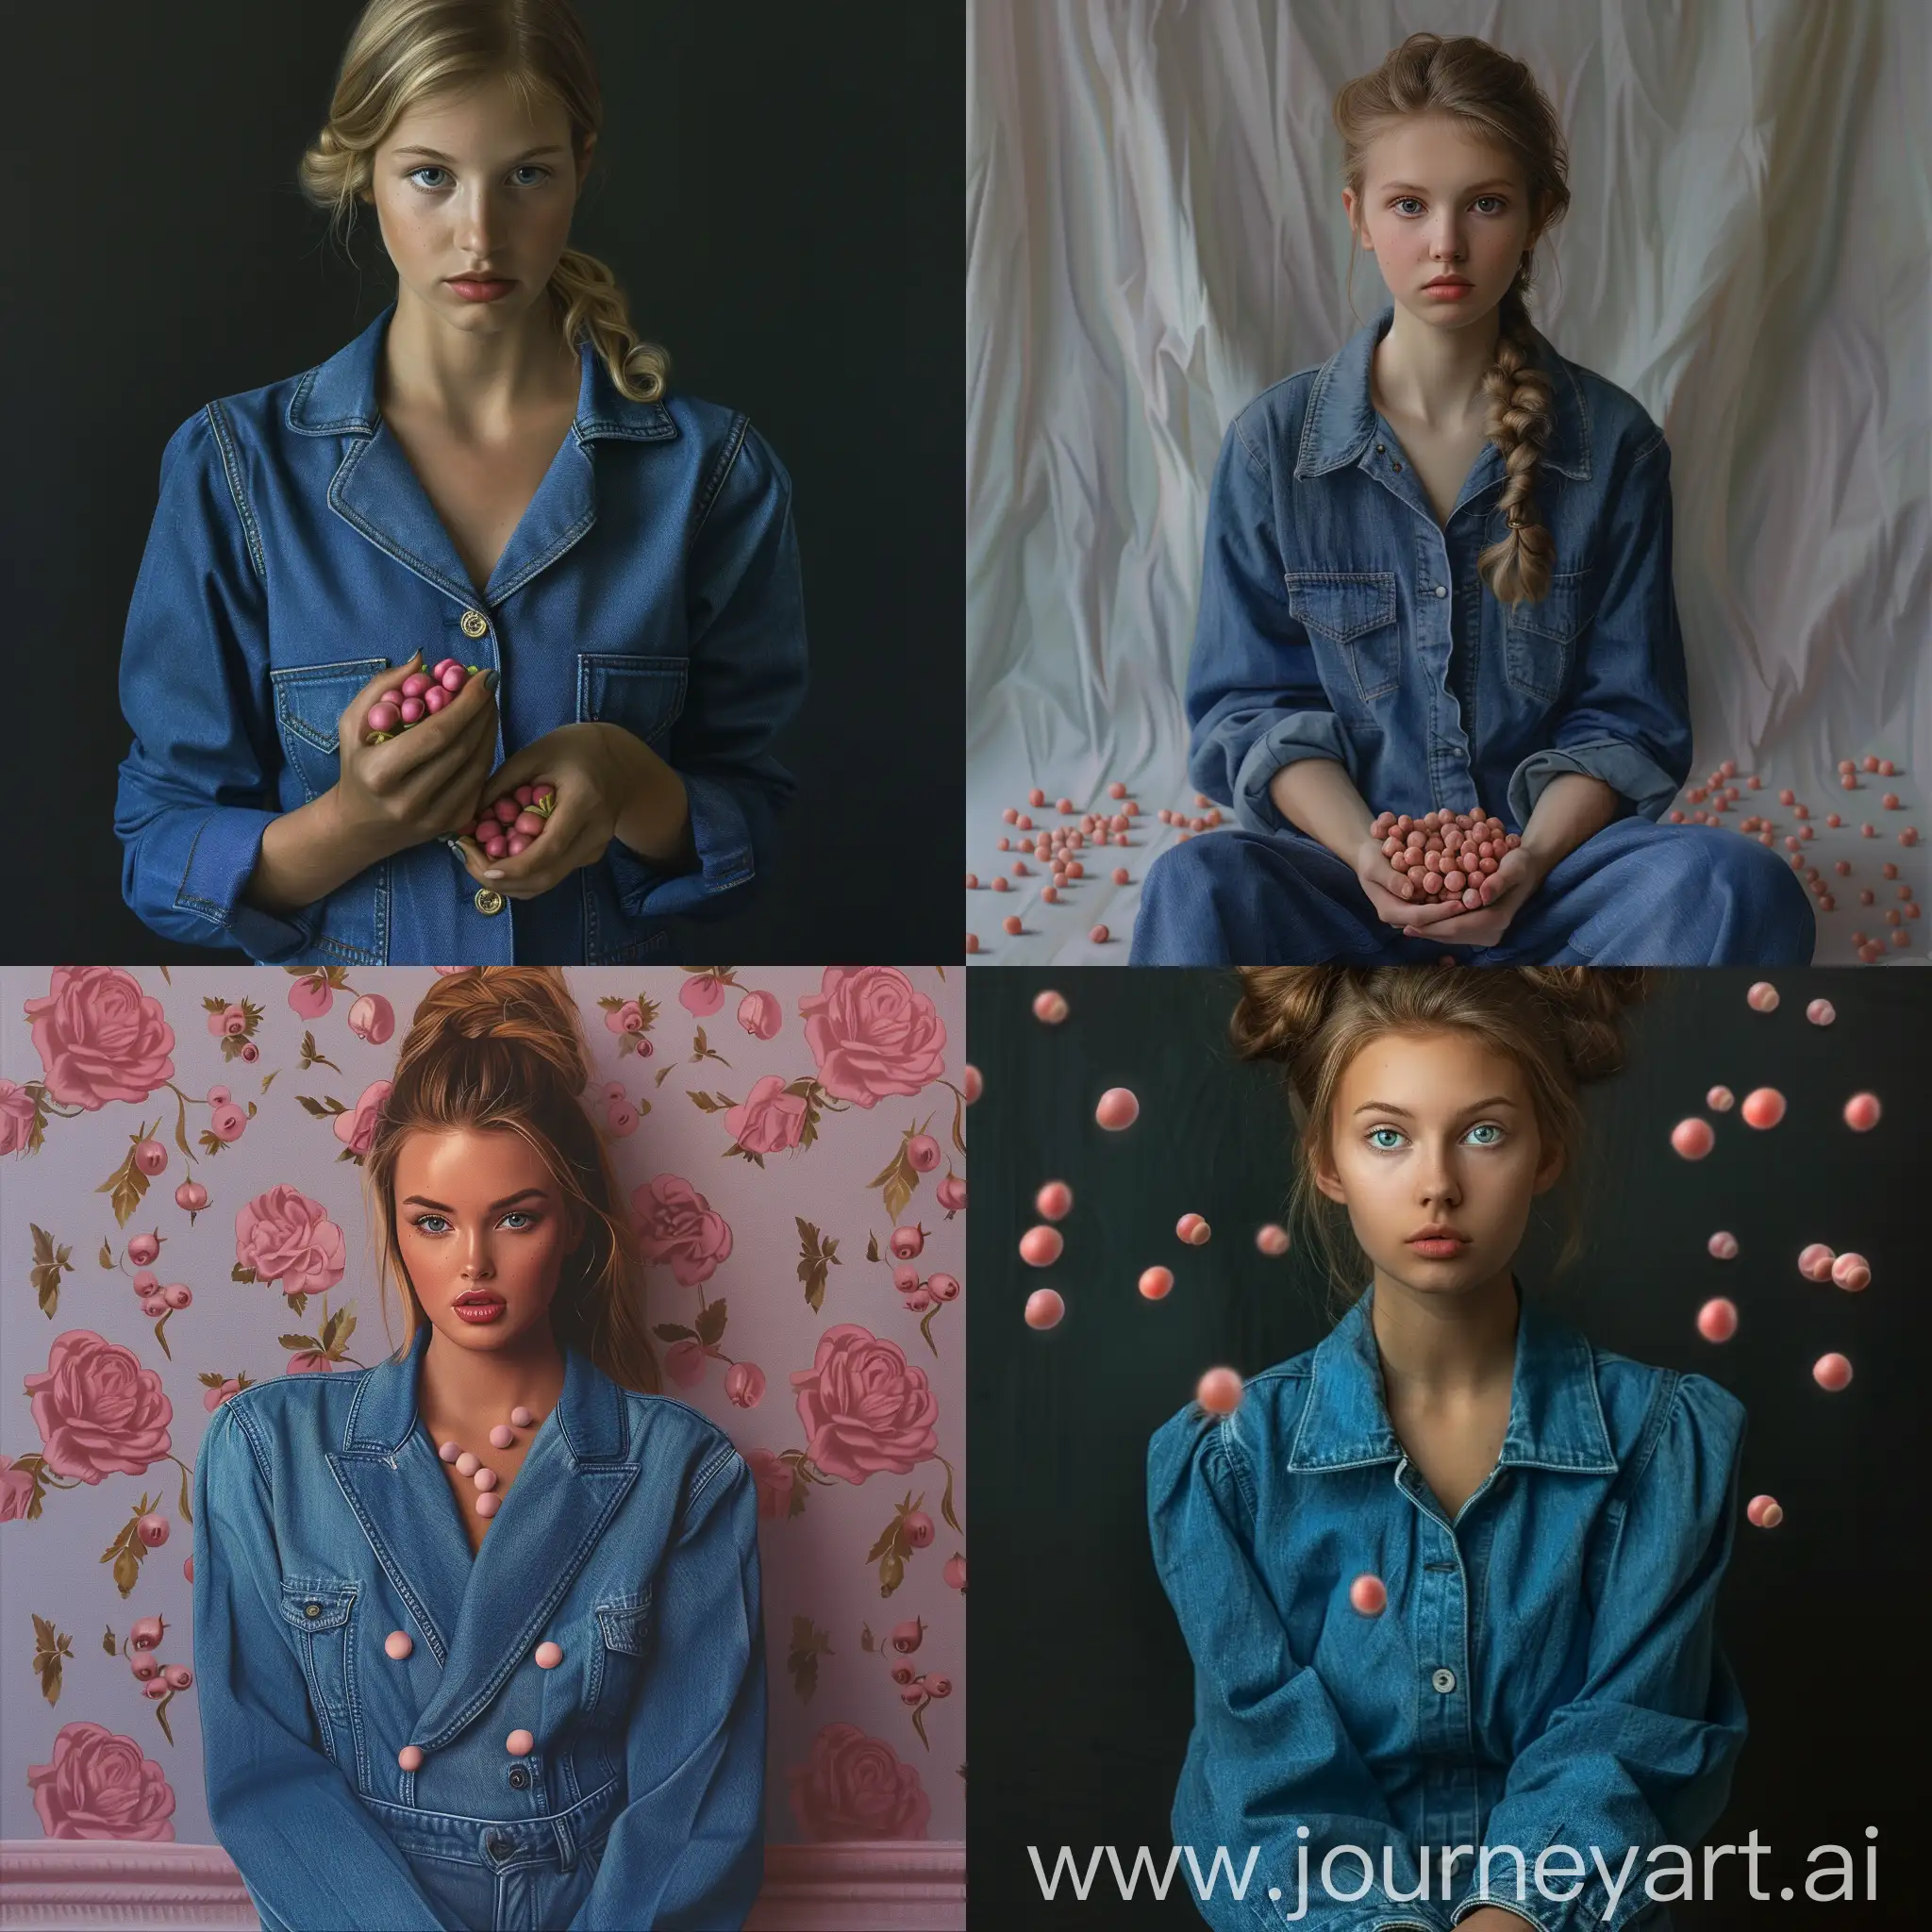 Photorealism: A girl of model appearance in a blue denim suit and packing pepper pink peas